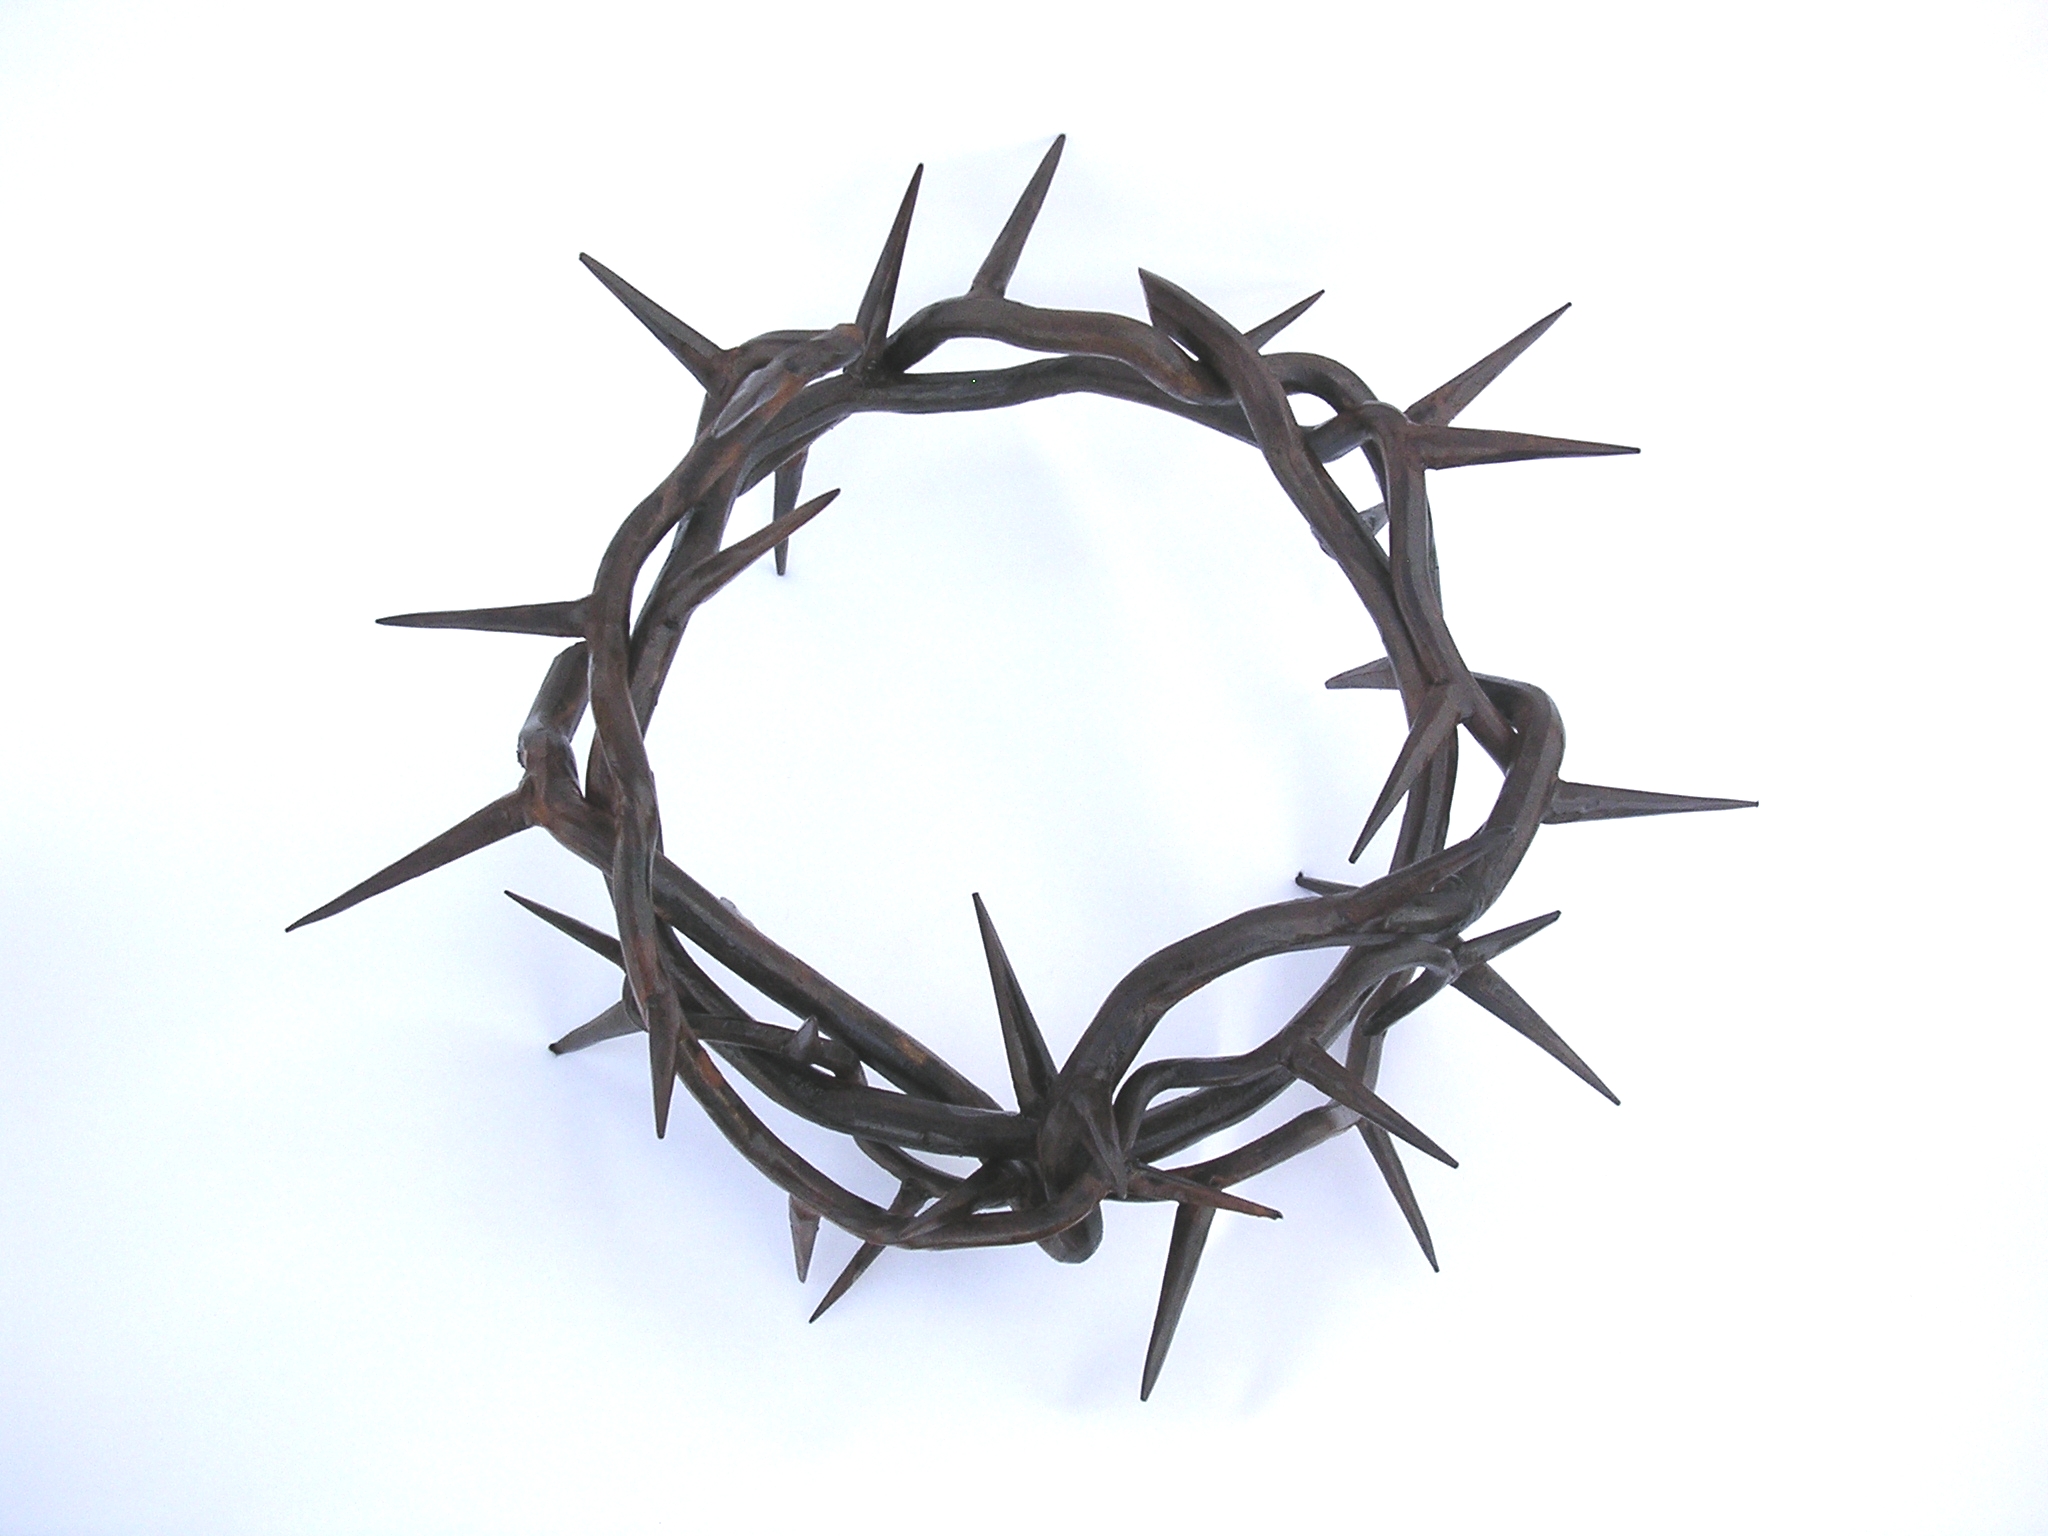 religious clip art crown of thorns - photo #32